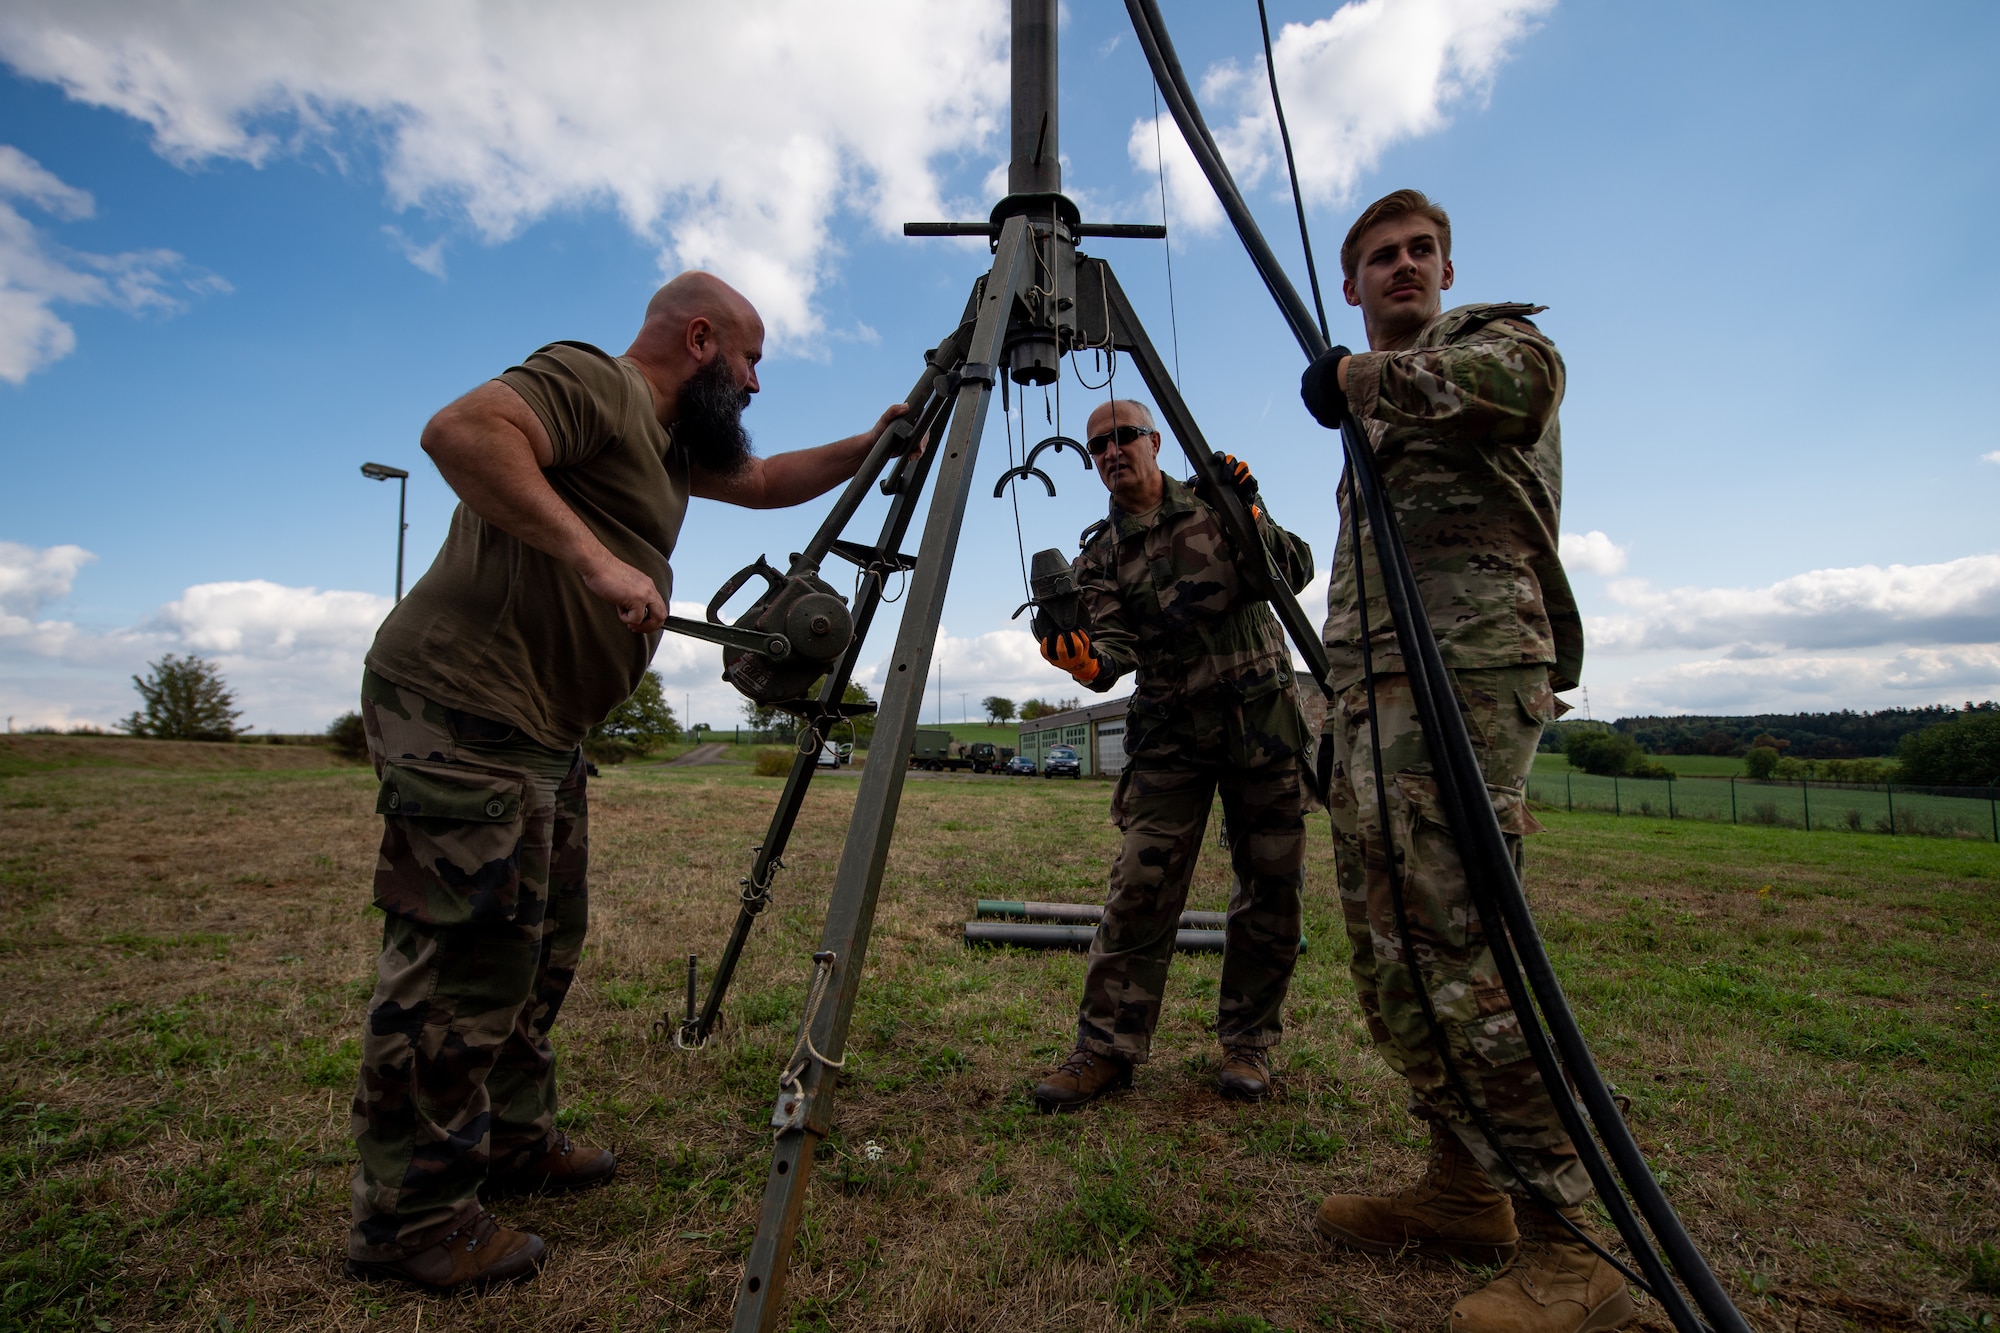 French and U.S. Service members disassemble an antenna used by the French